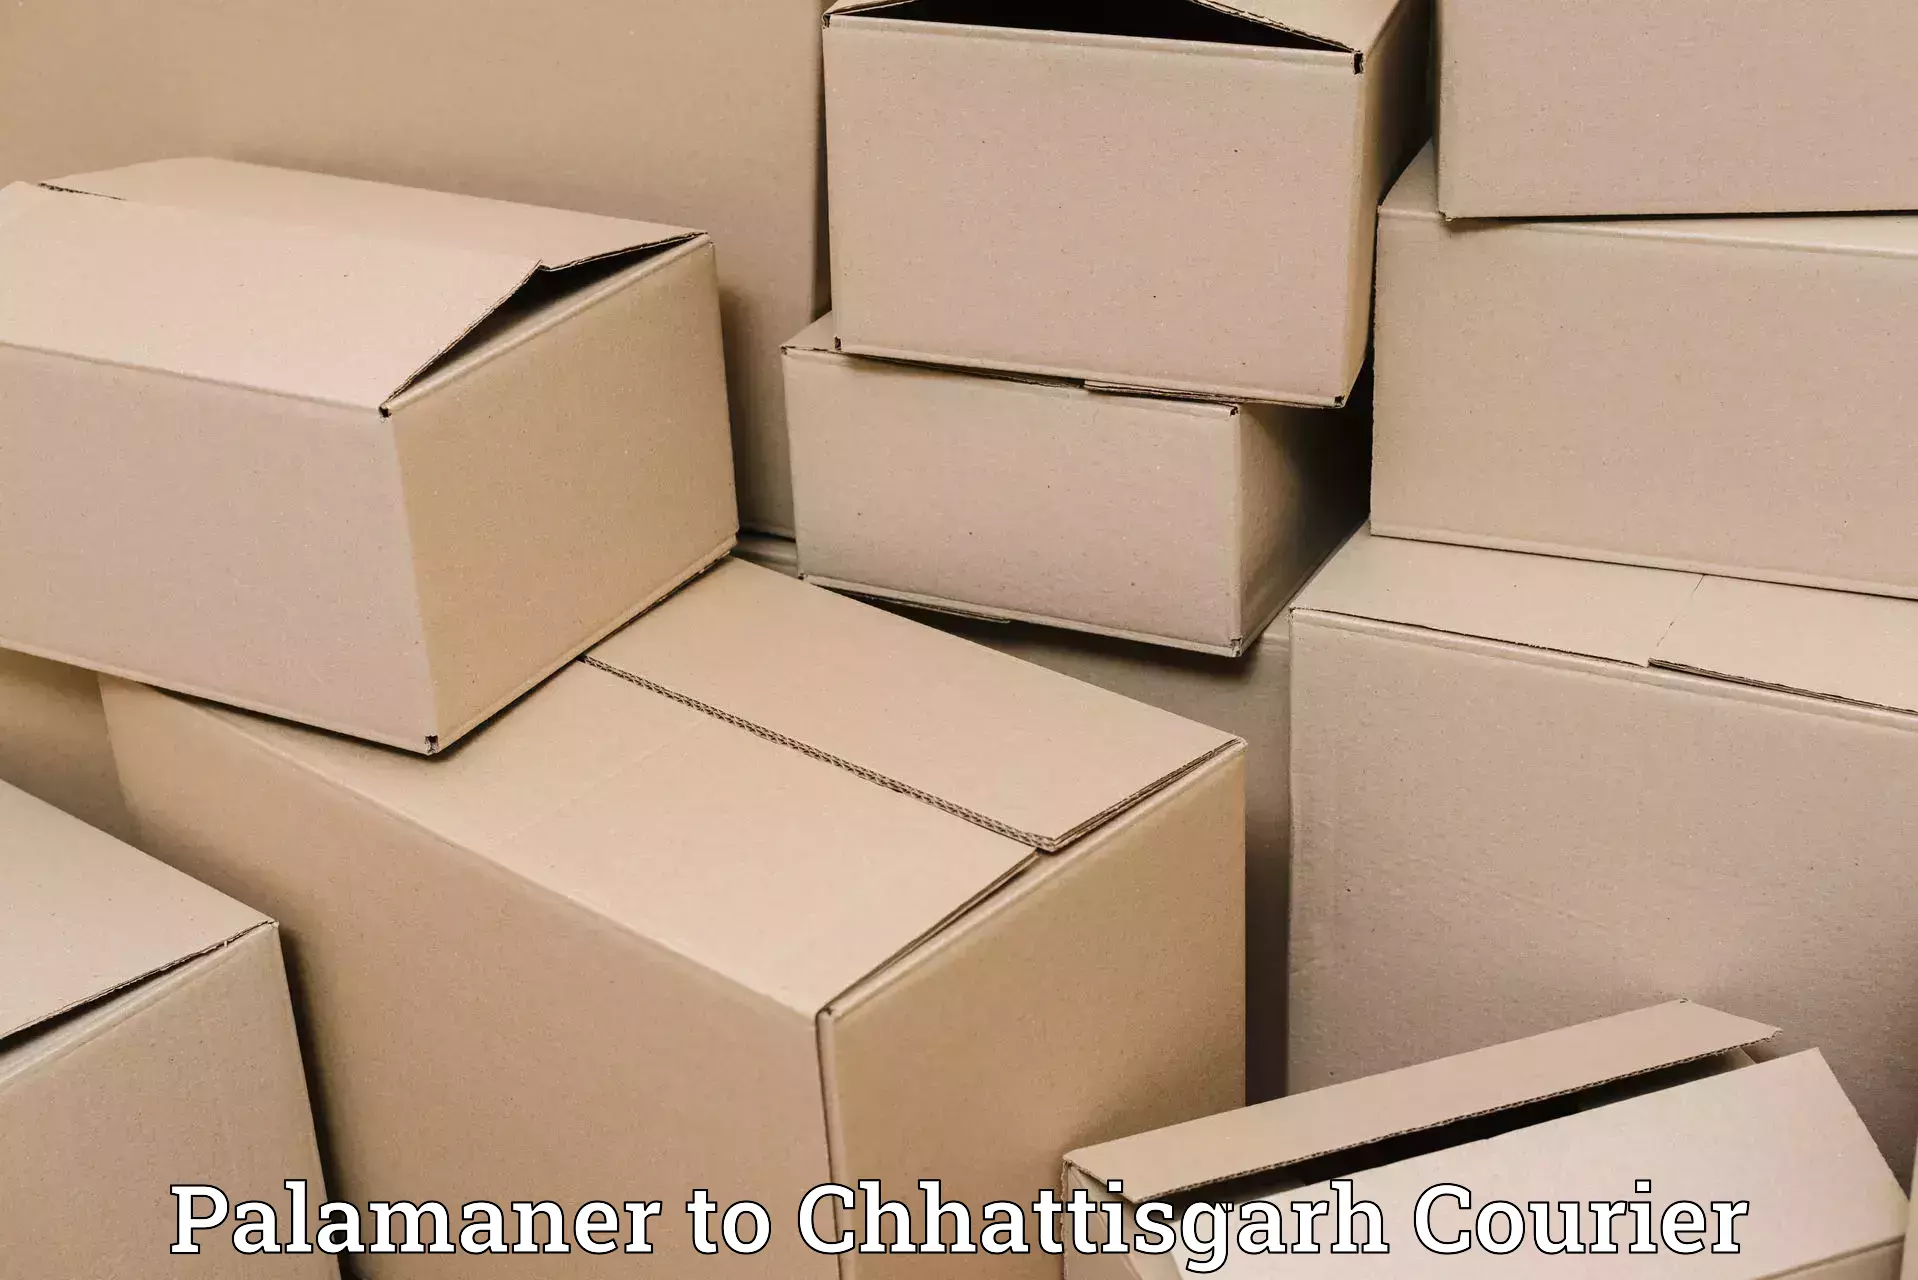 Express delivery capabilities Palamaner to Bilaspur